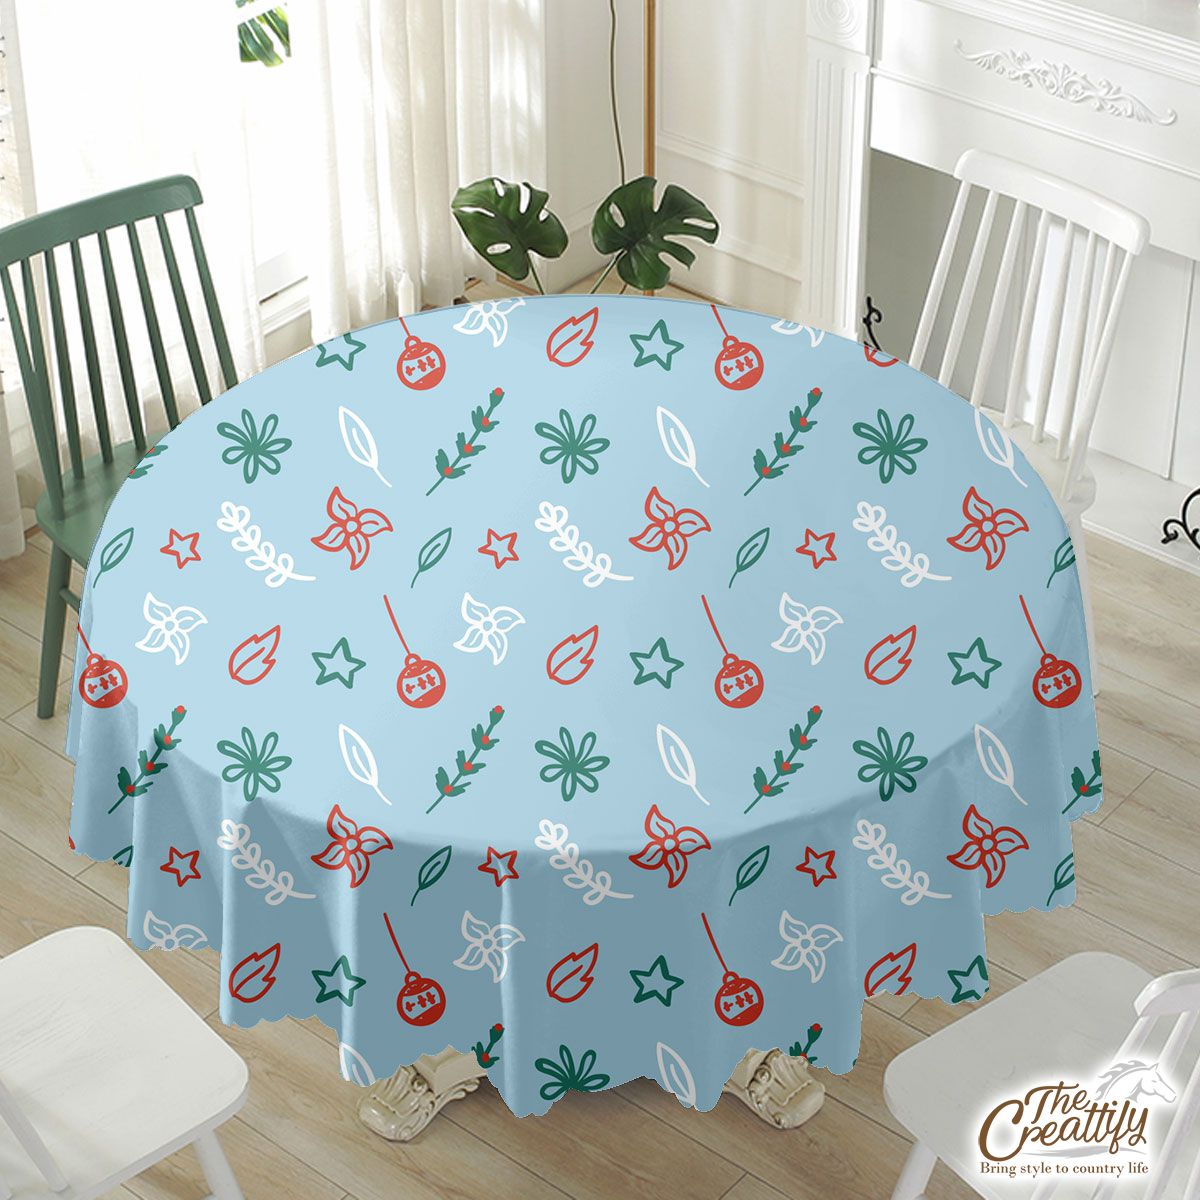 Christmas Lights, Candy Cane And Holly Tree  3 Waterproof Tablecloth